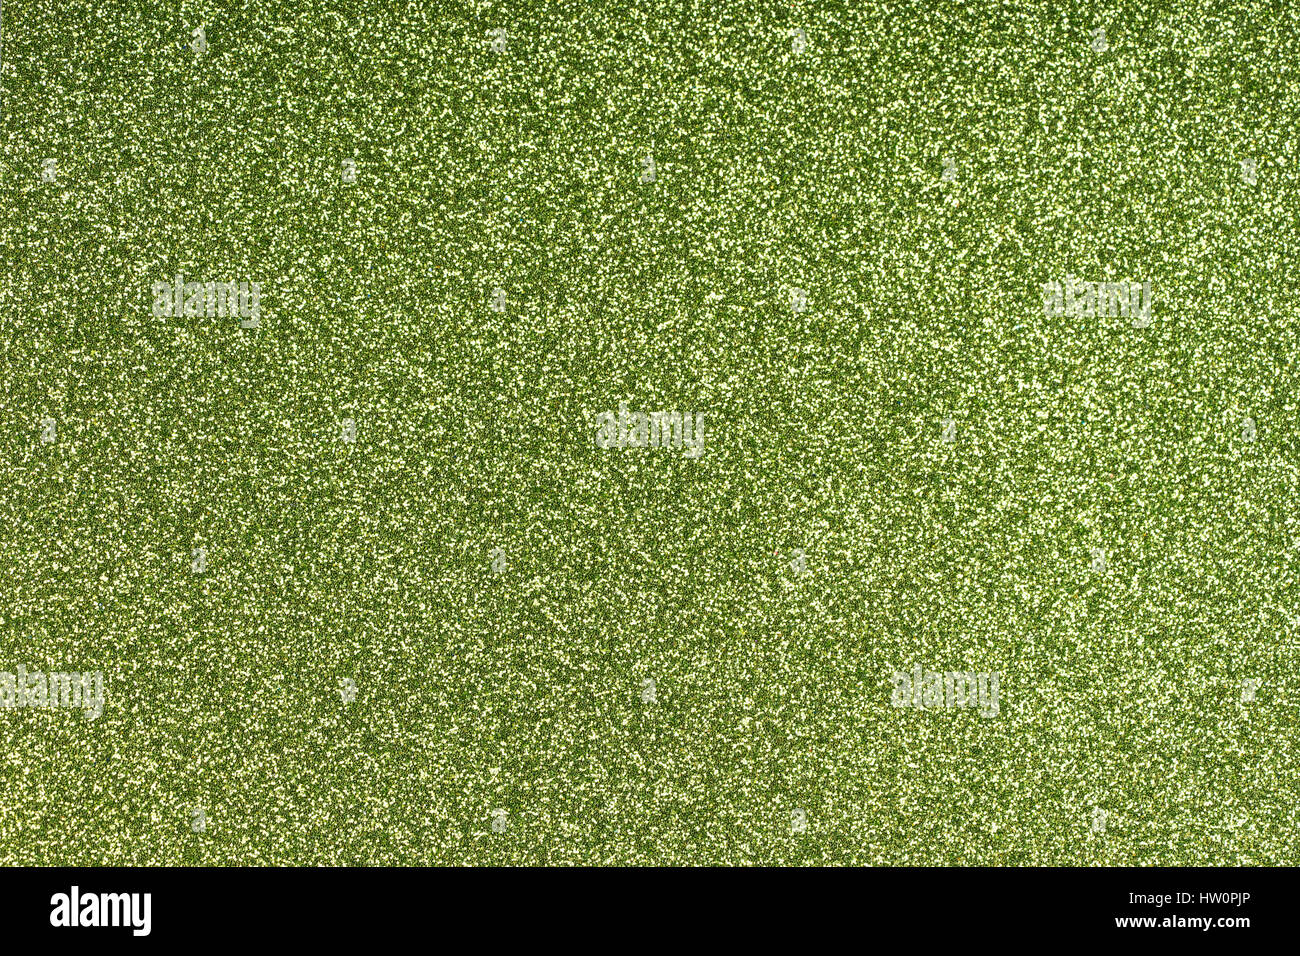 Green Glitter Backgrounds High Resolution Stock Photography And Images Alamy